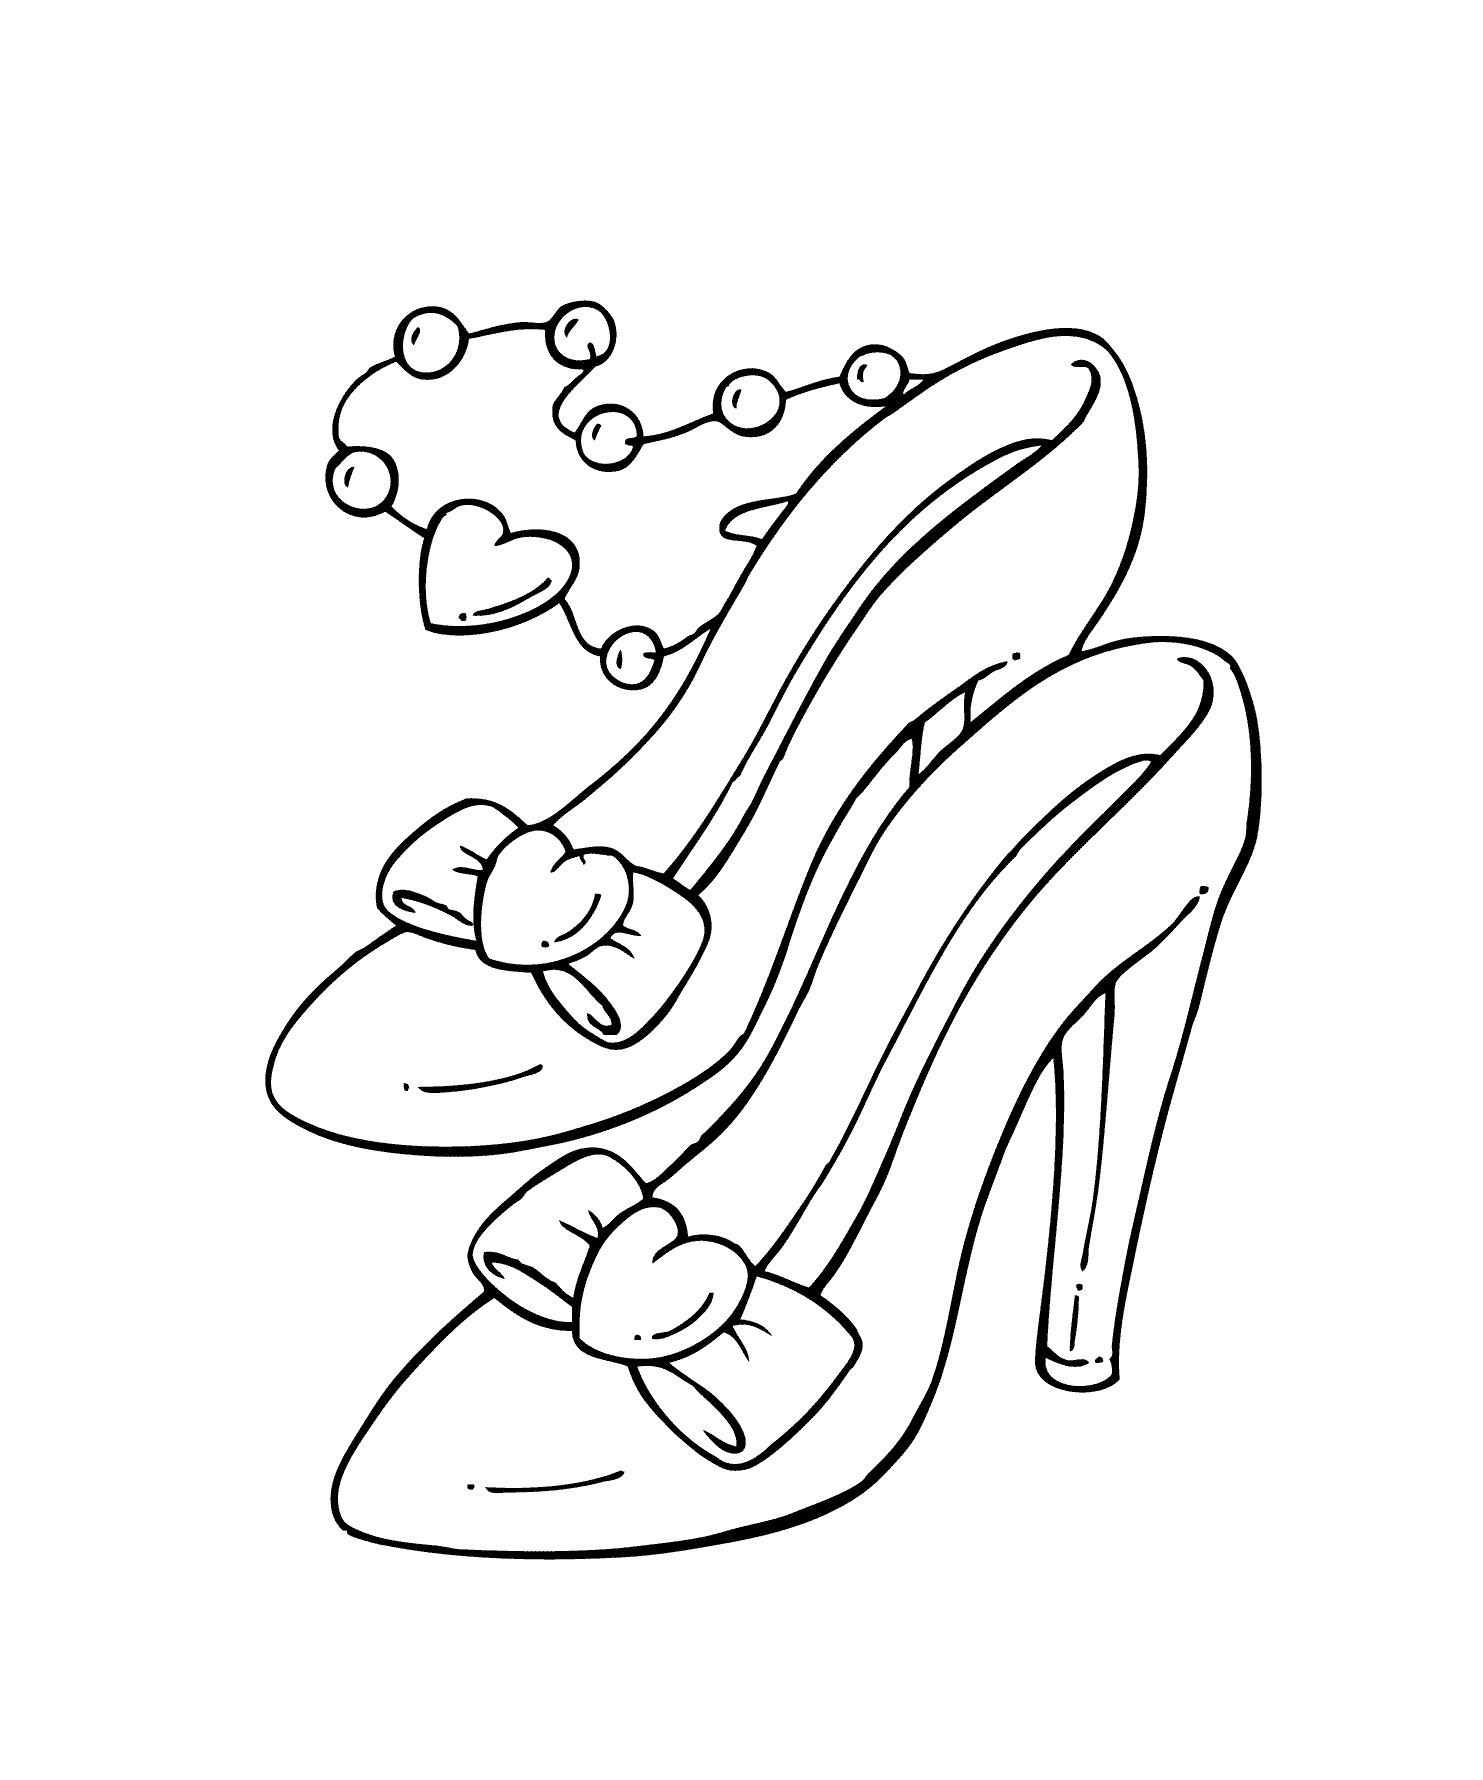 pictures for girls to colour coloring pages for girls best coloring pages for kids colour to girls pictures for 